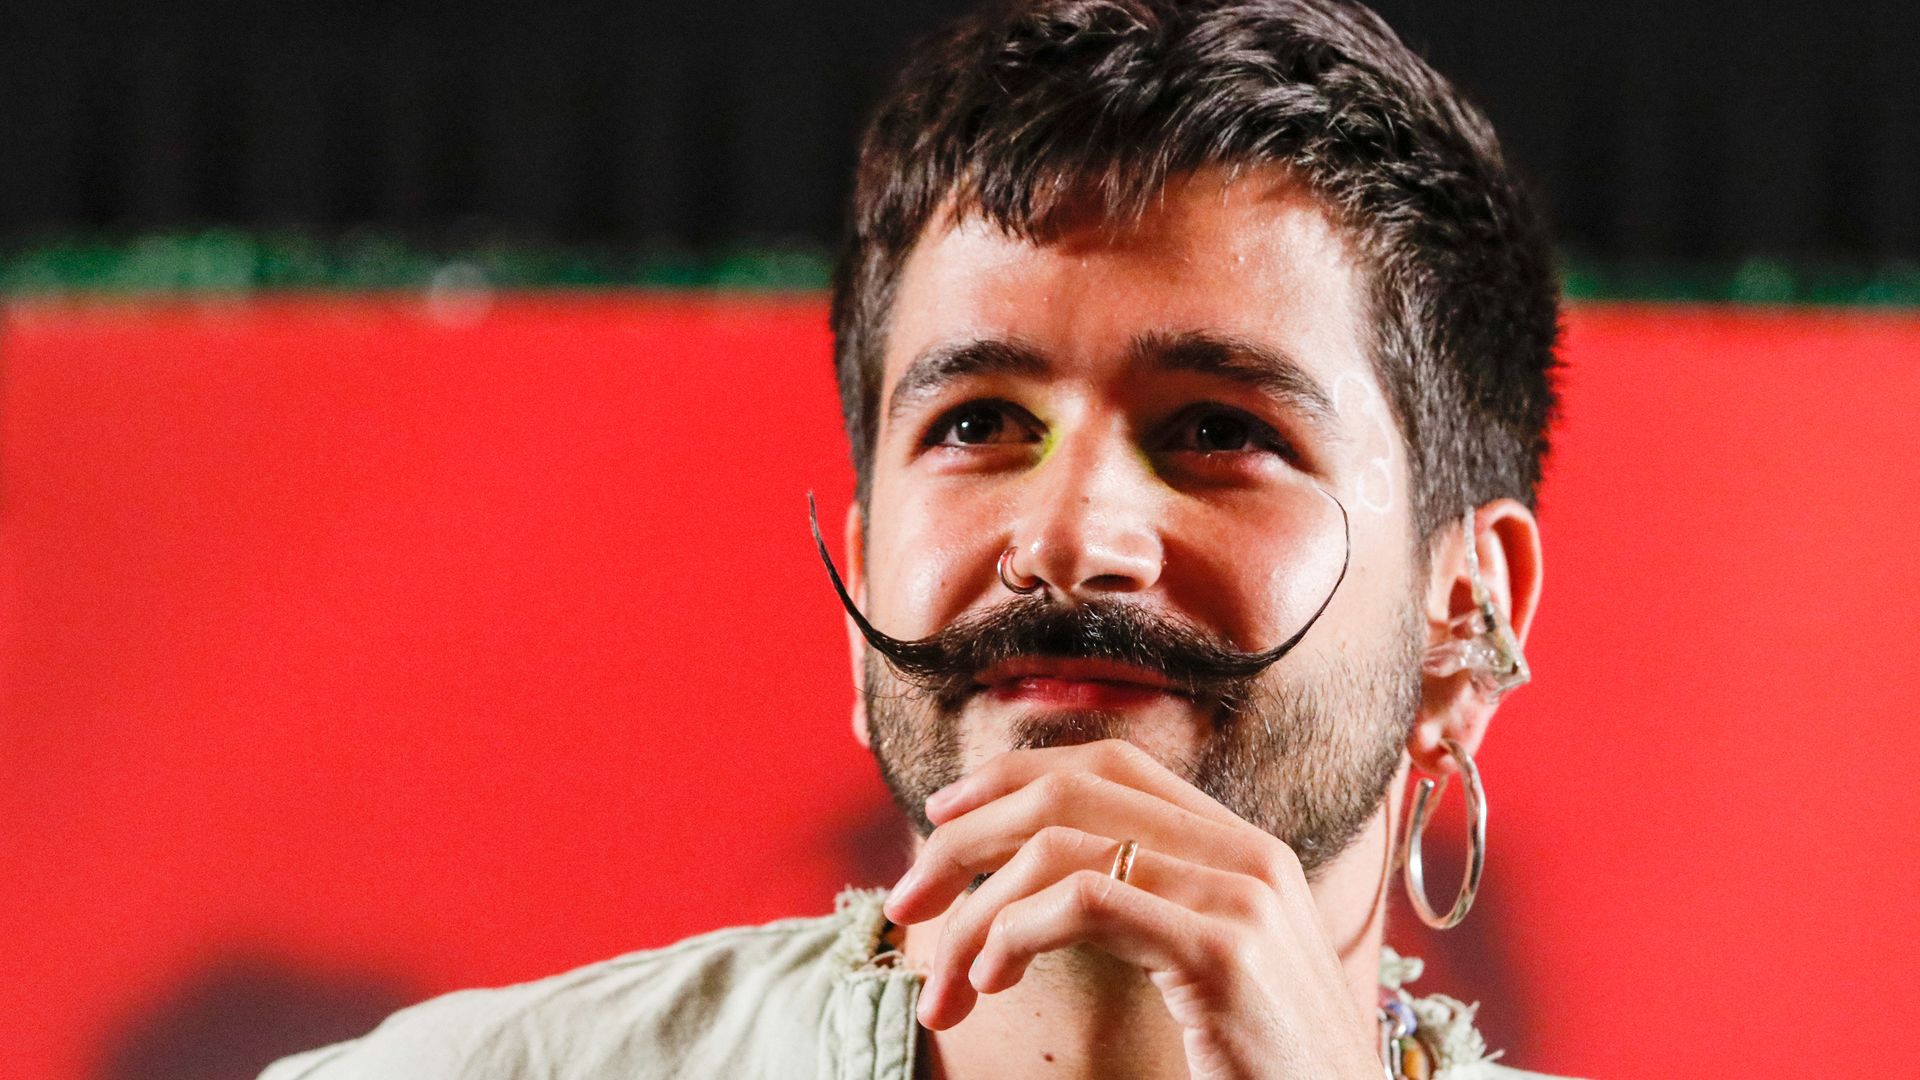 Caolombian singer Camilo has a handlebar mustache and smiles.